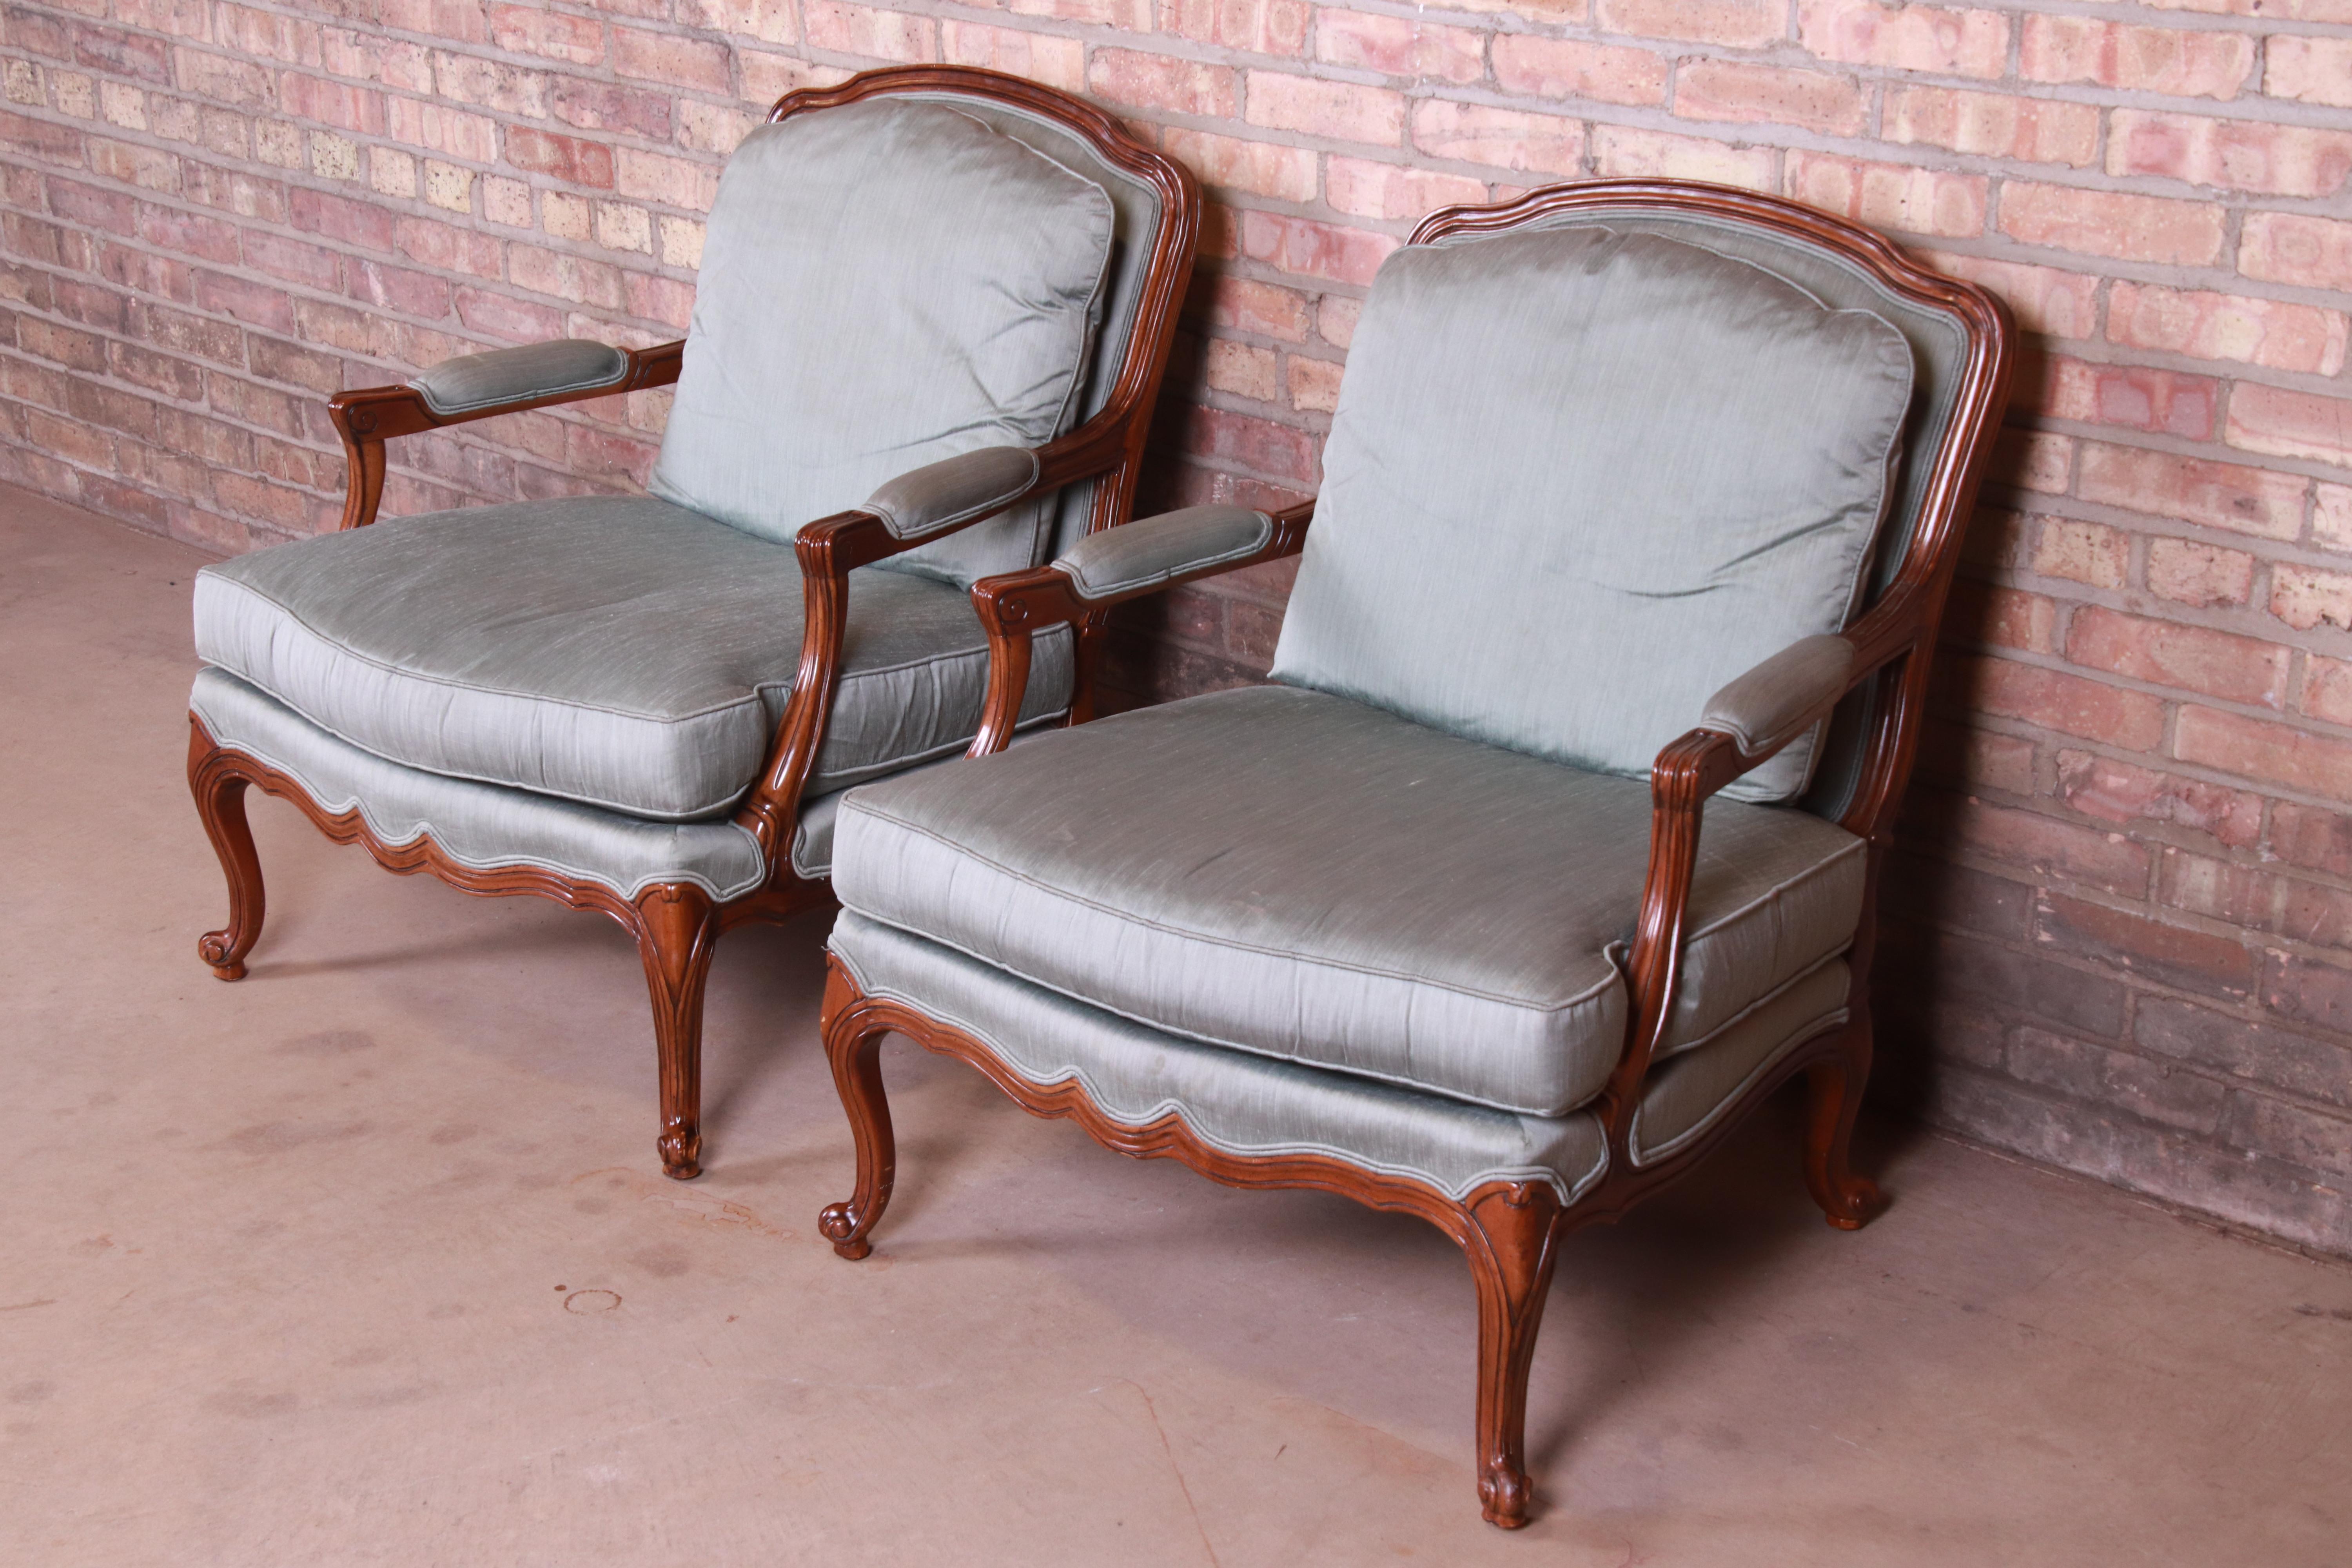 20th Century Drexel Heritage French Provincial Louis XV Carved Walnut Bergère Chairs, Pair